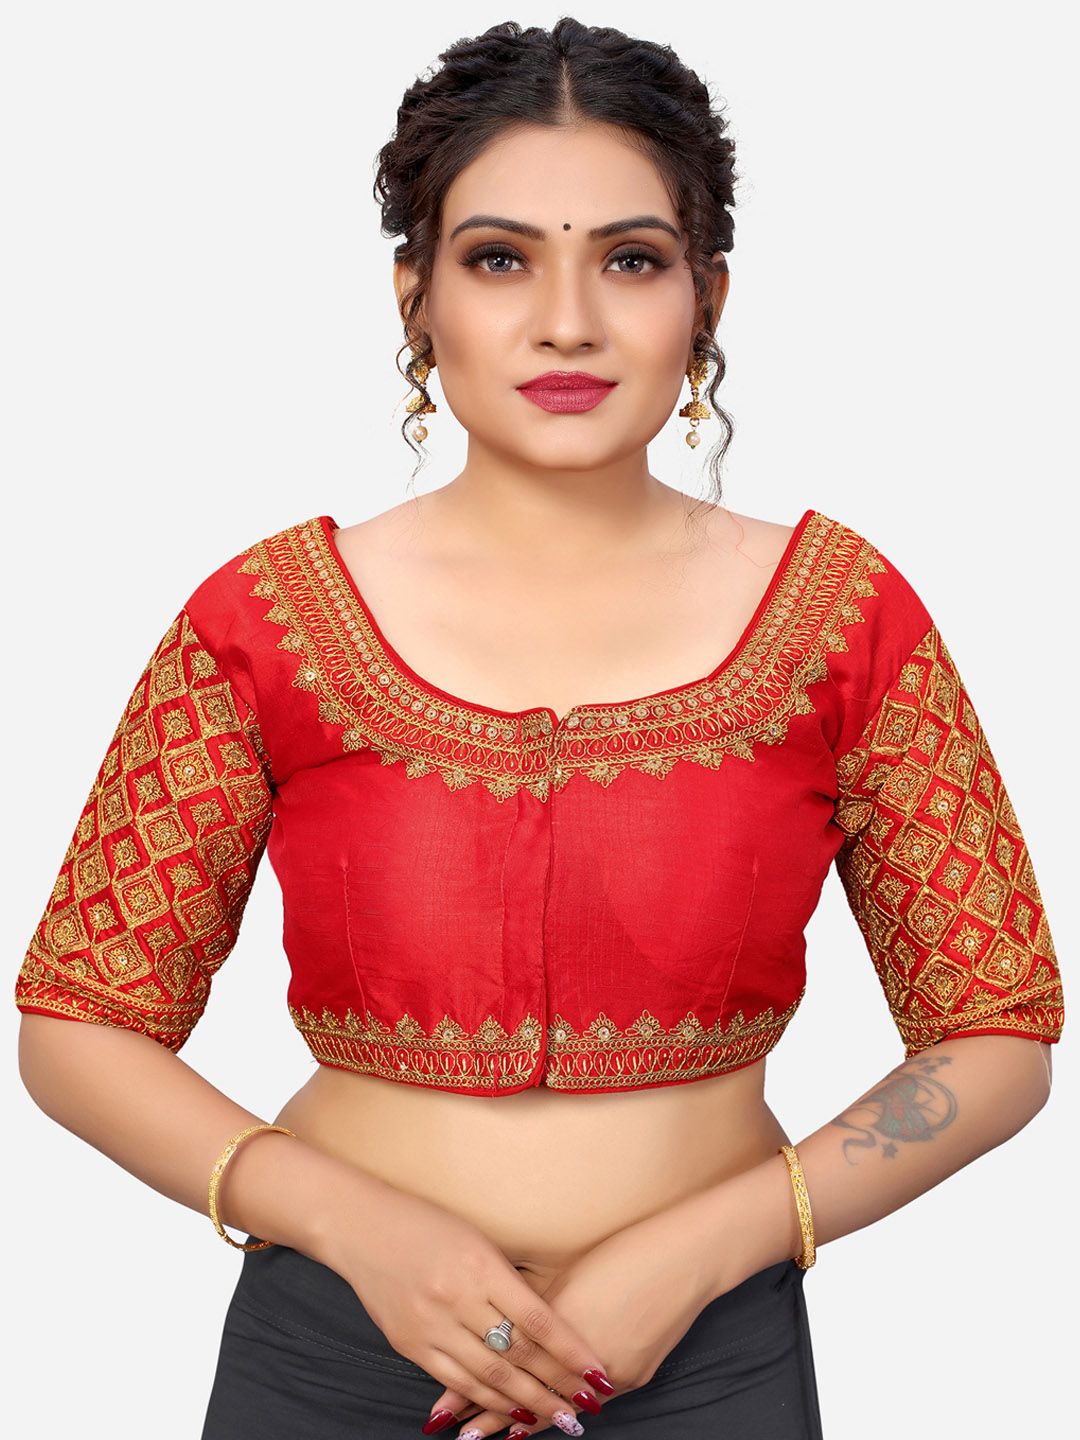 SIRIL Red Embroidered Saree Blouse Price in India